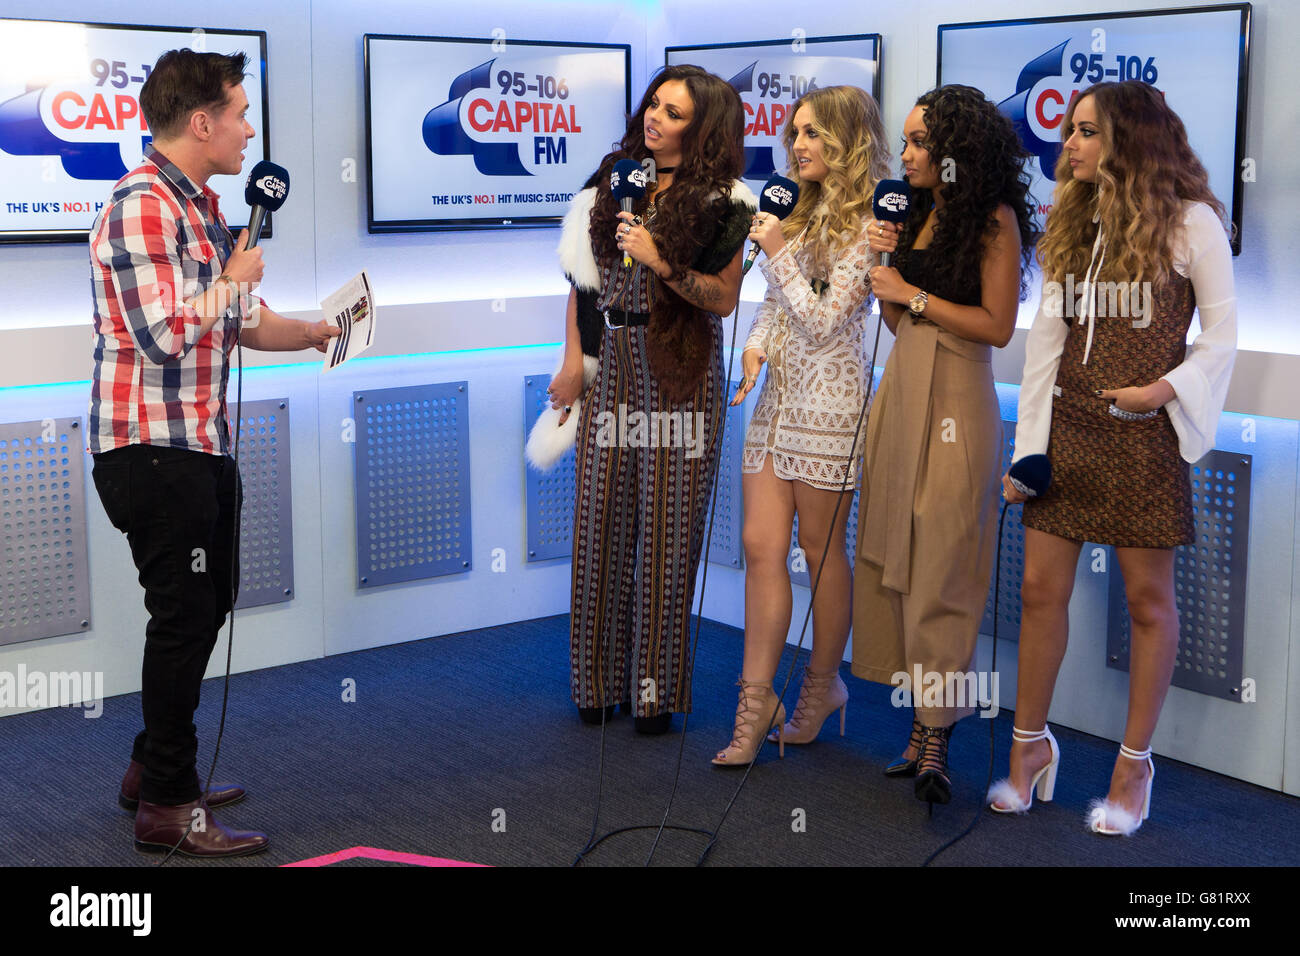 Capital FM presenter Greg Burns (L) and ( L to R) Jesy Nelson, Perrie Edwards, Leigh-Anne Pinnock and Jade Thirlwall from Little Mix during an interview at Capital FM Summertime Ball Radio studio, Wembley Stadium, London. Daniel Leal-Olivas/PA Showbiz Stock Photo